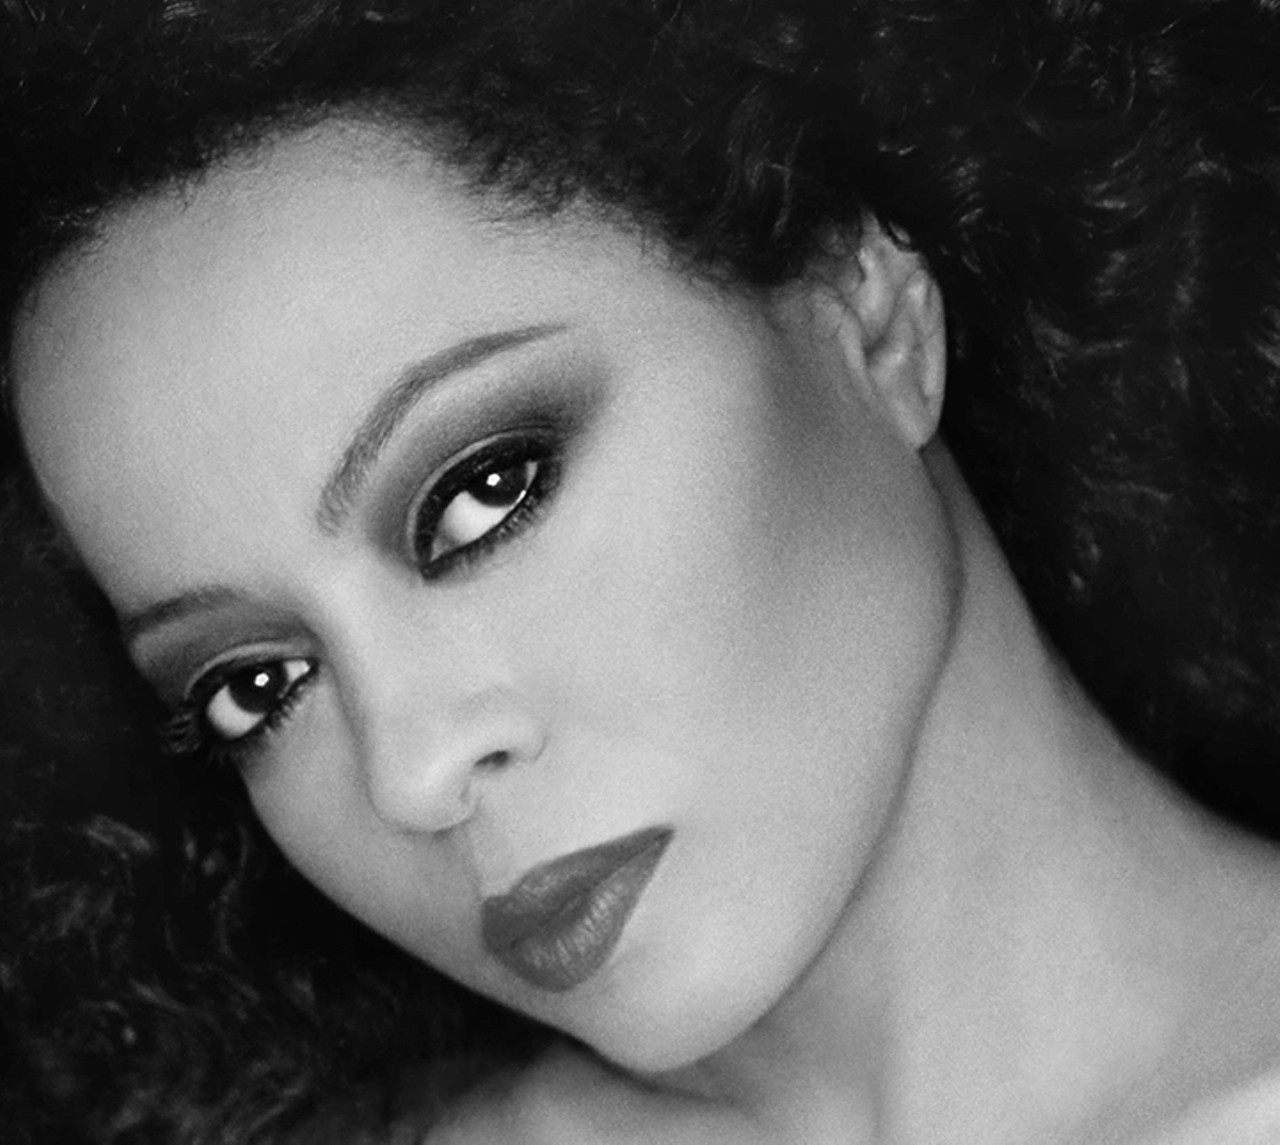 Wednesday, Jan. 9Diana Ross at the Dr. Phillips Center